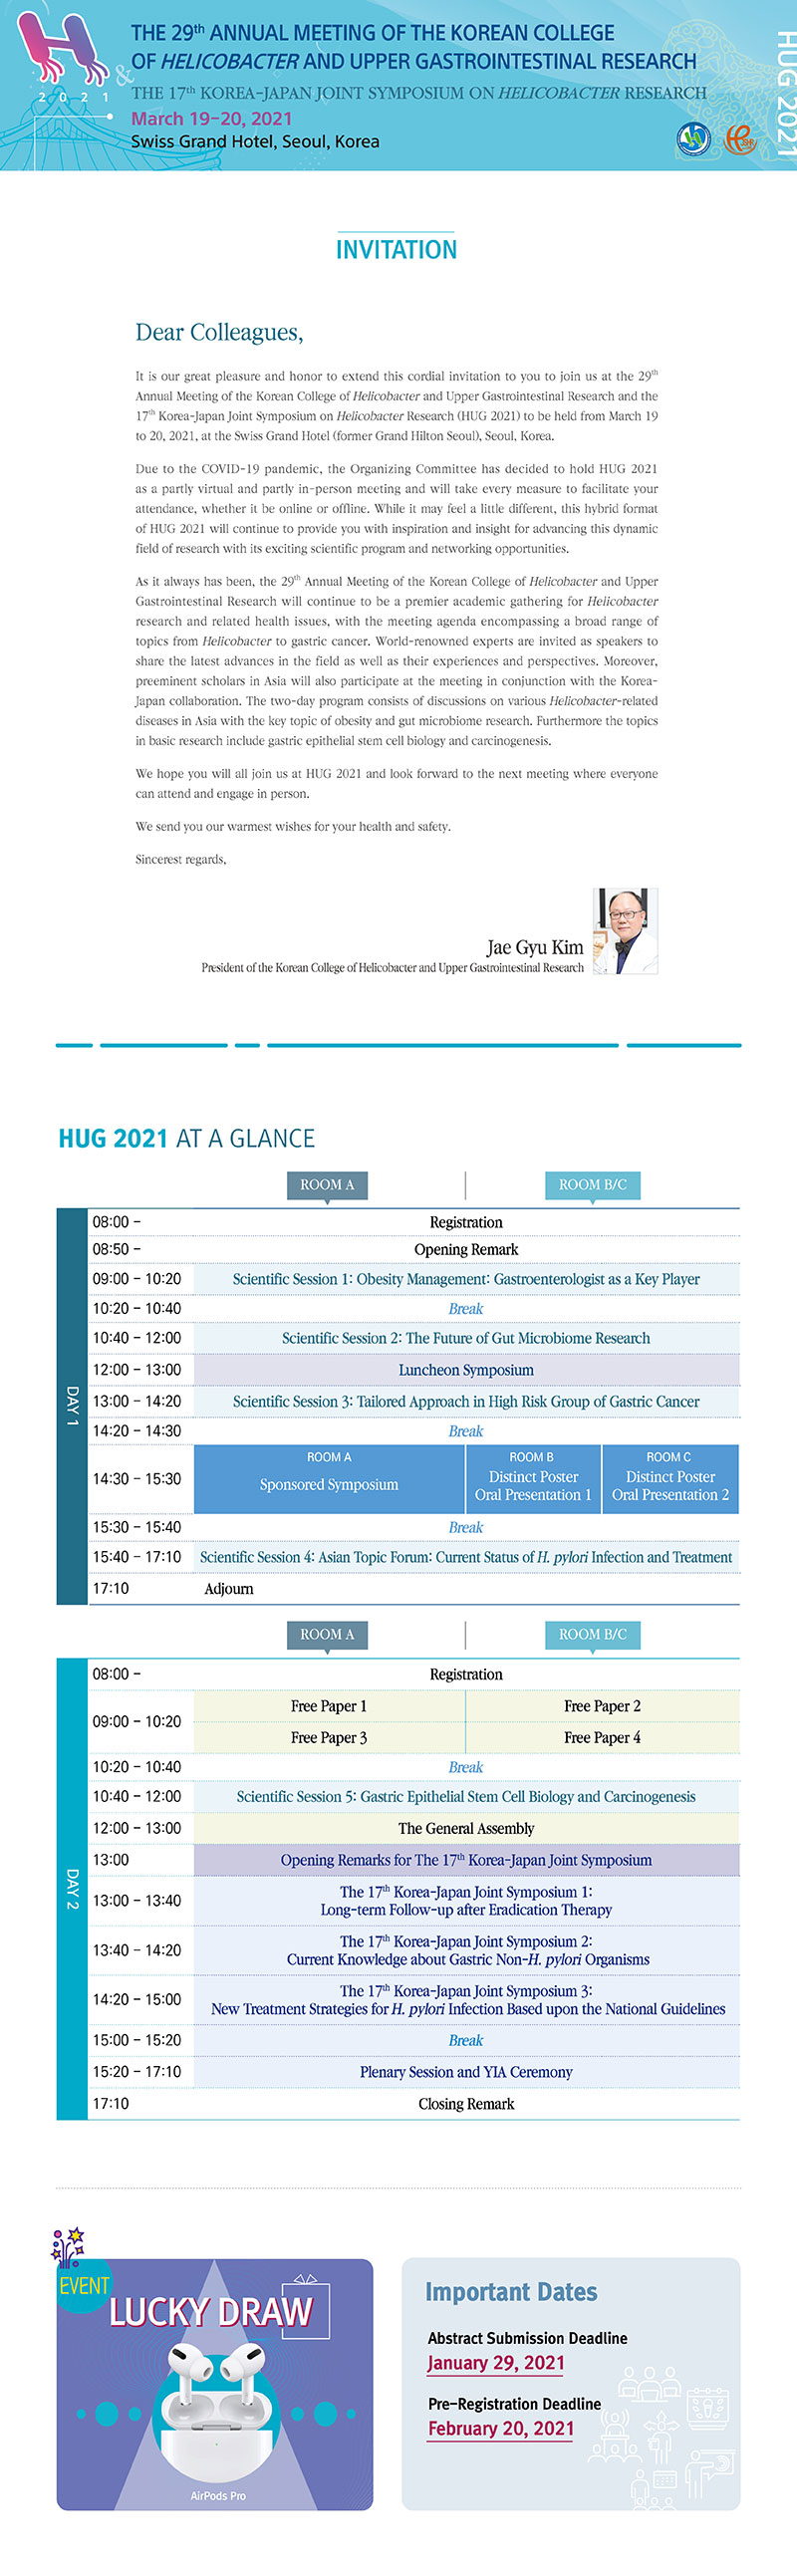 29th Annual Meeting of the Korean College of Helicobacter and Upper Gastrointestinal Research & The 17th Korea-Japan Joint Symposium on Helicobacter Research” (HUG 2021) from March 19th, 2021 to March 20th 2021.